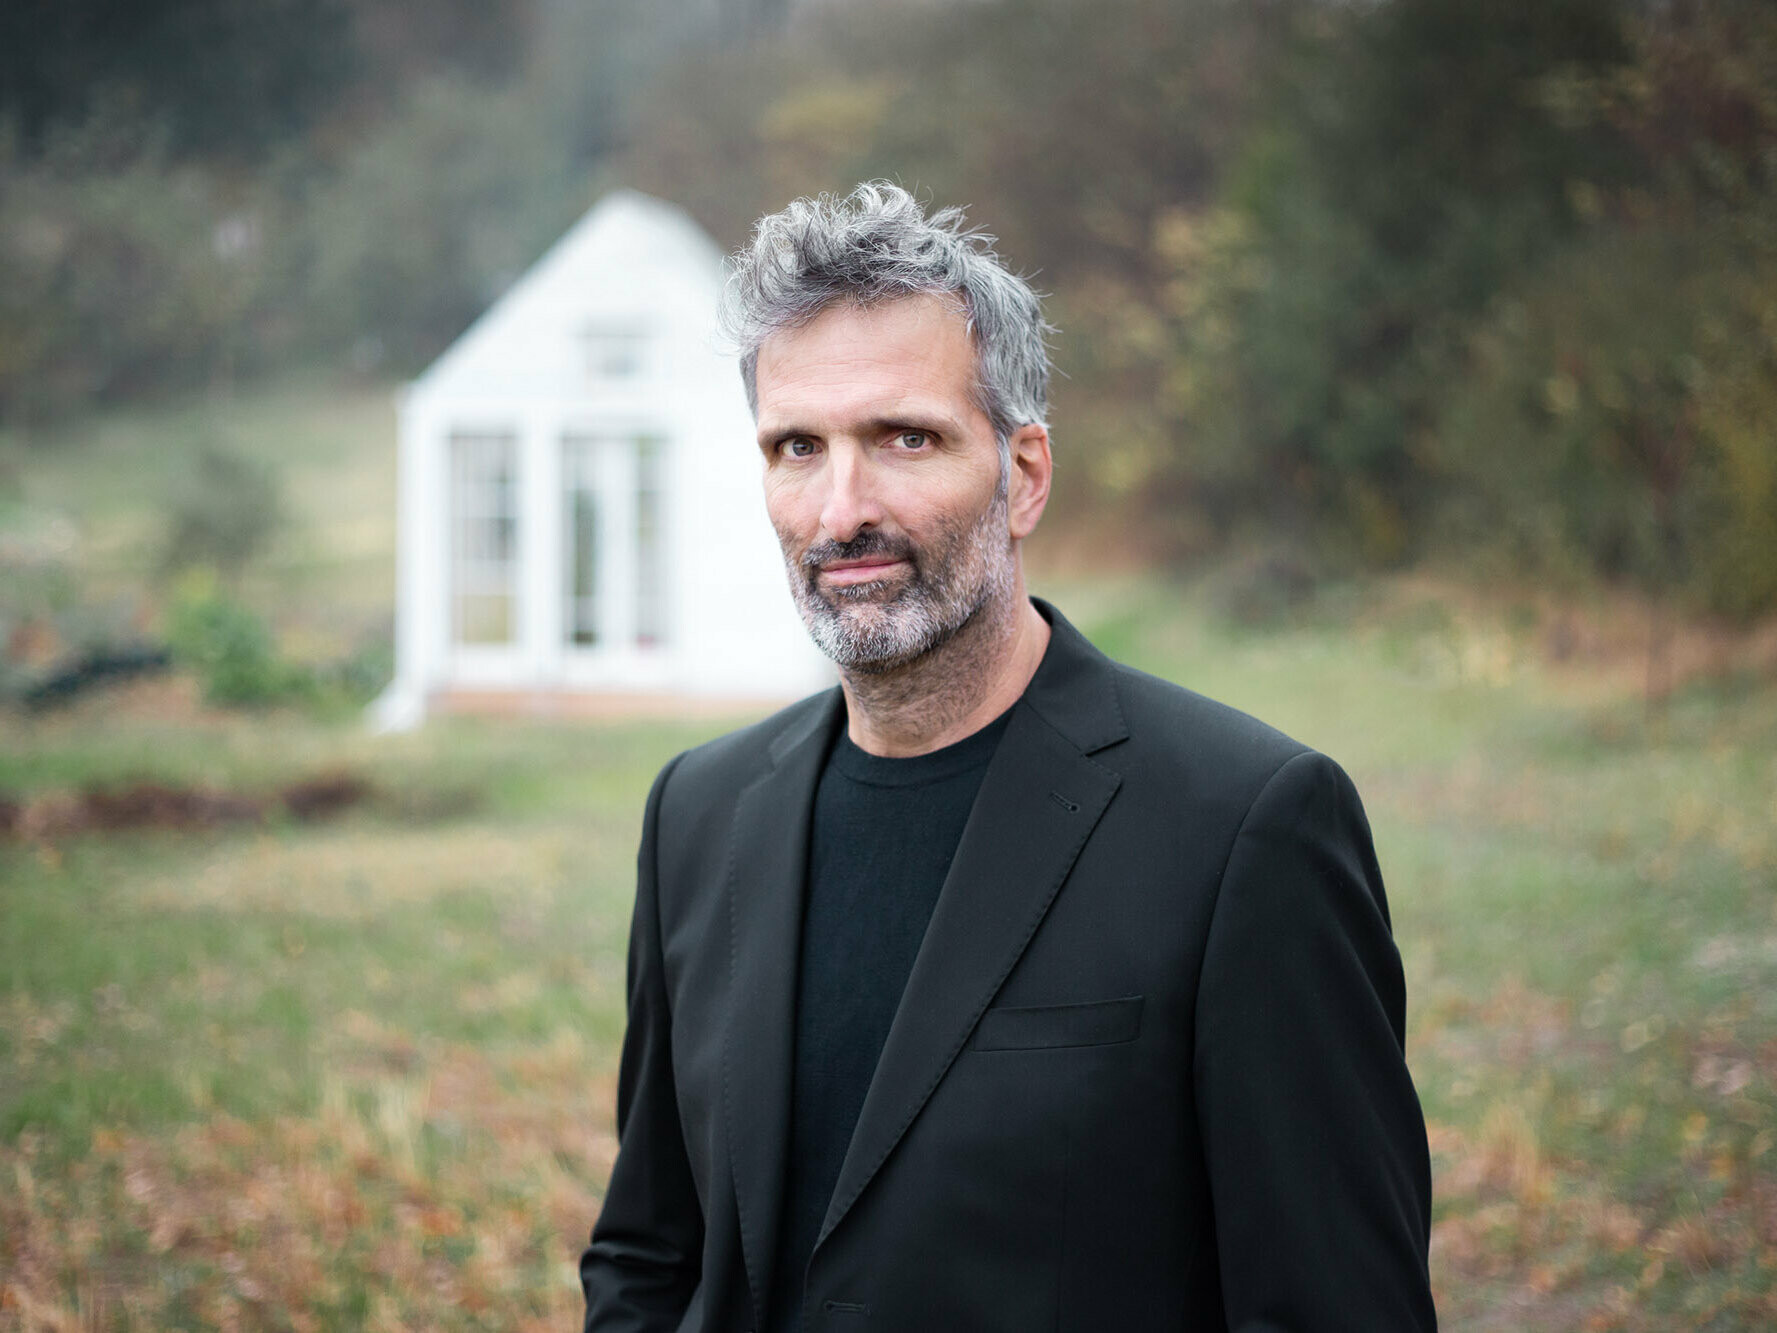 Portrait of the lead architect Carlo Pierantozzi from zooform architecture + design, behind him a meadow with a forest behind it and a small white building can be seen out of focus.